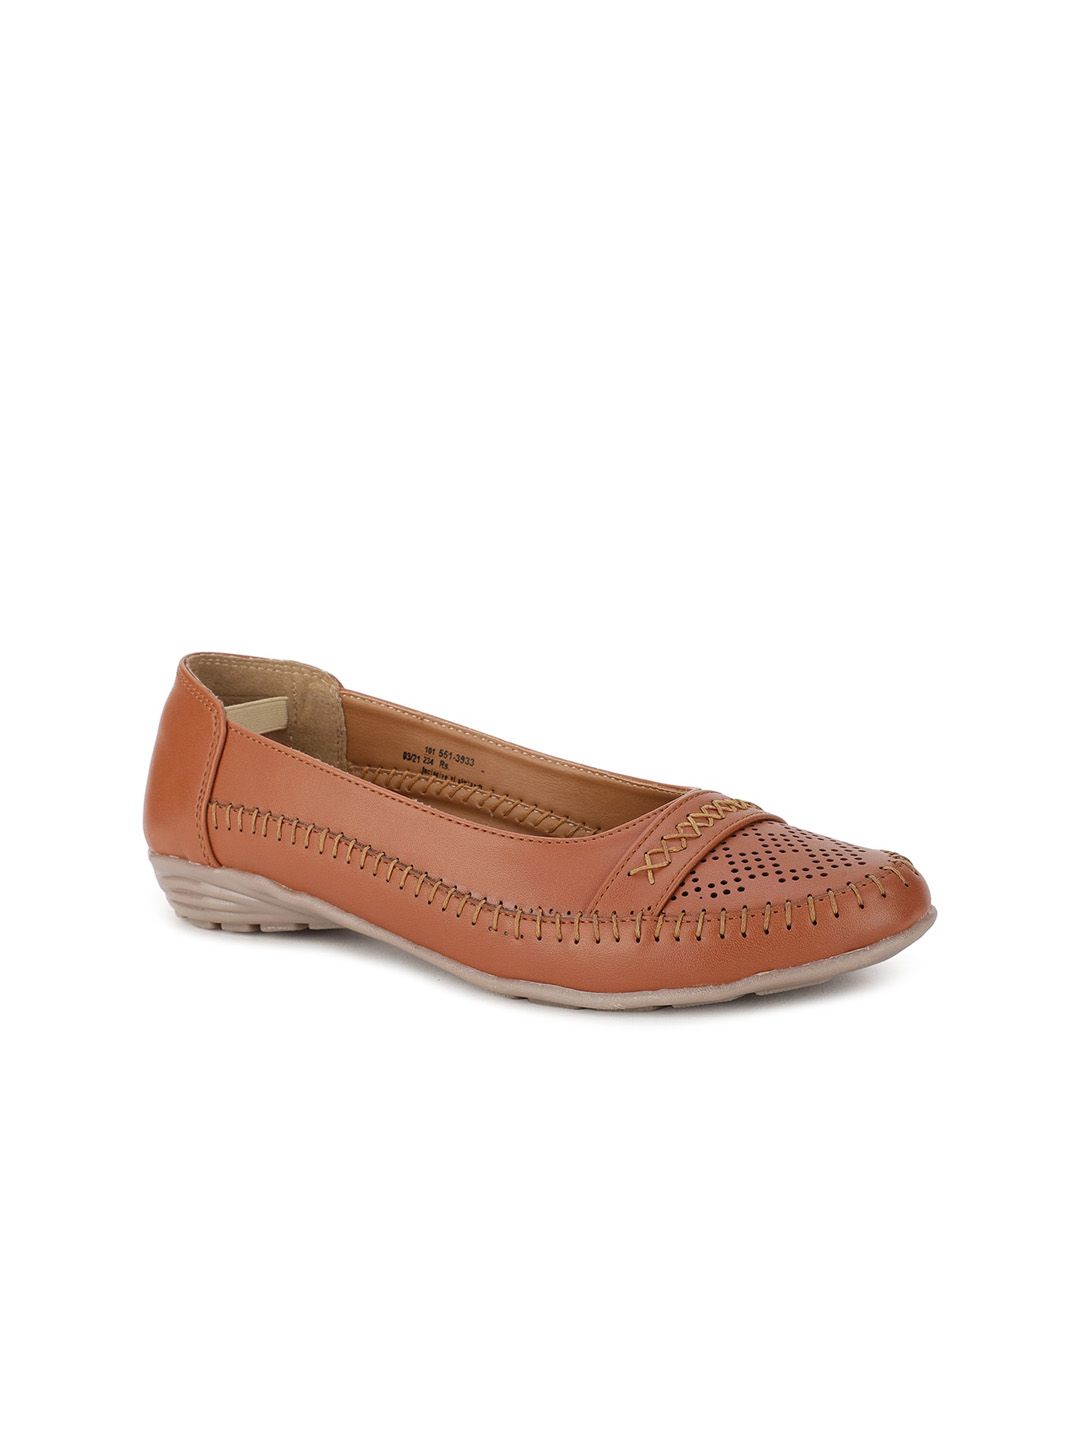 Bata Women Brown Textured Ballerinas with Laser Cuts Flats Price in India